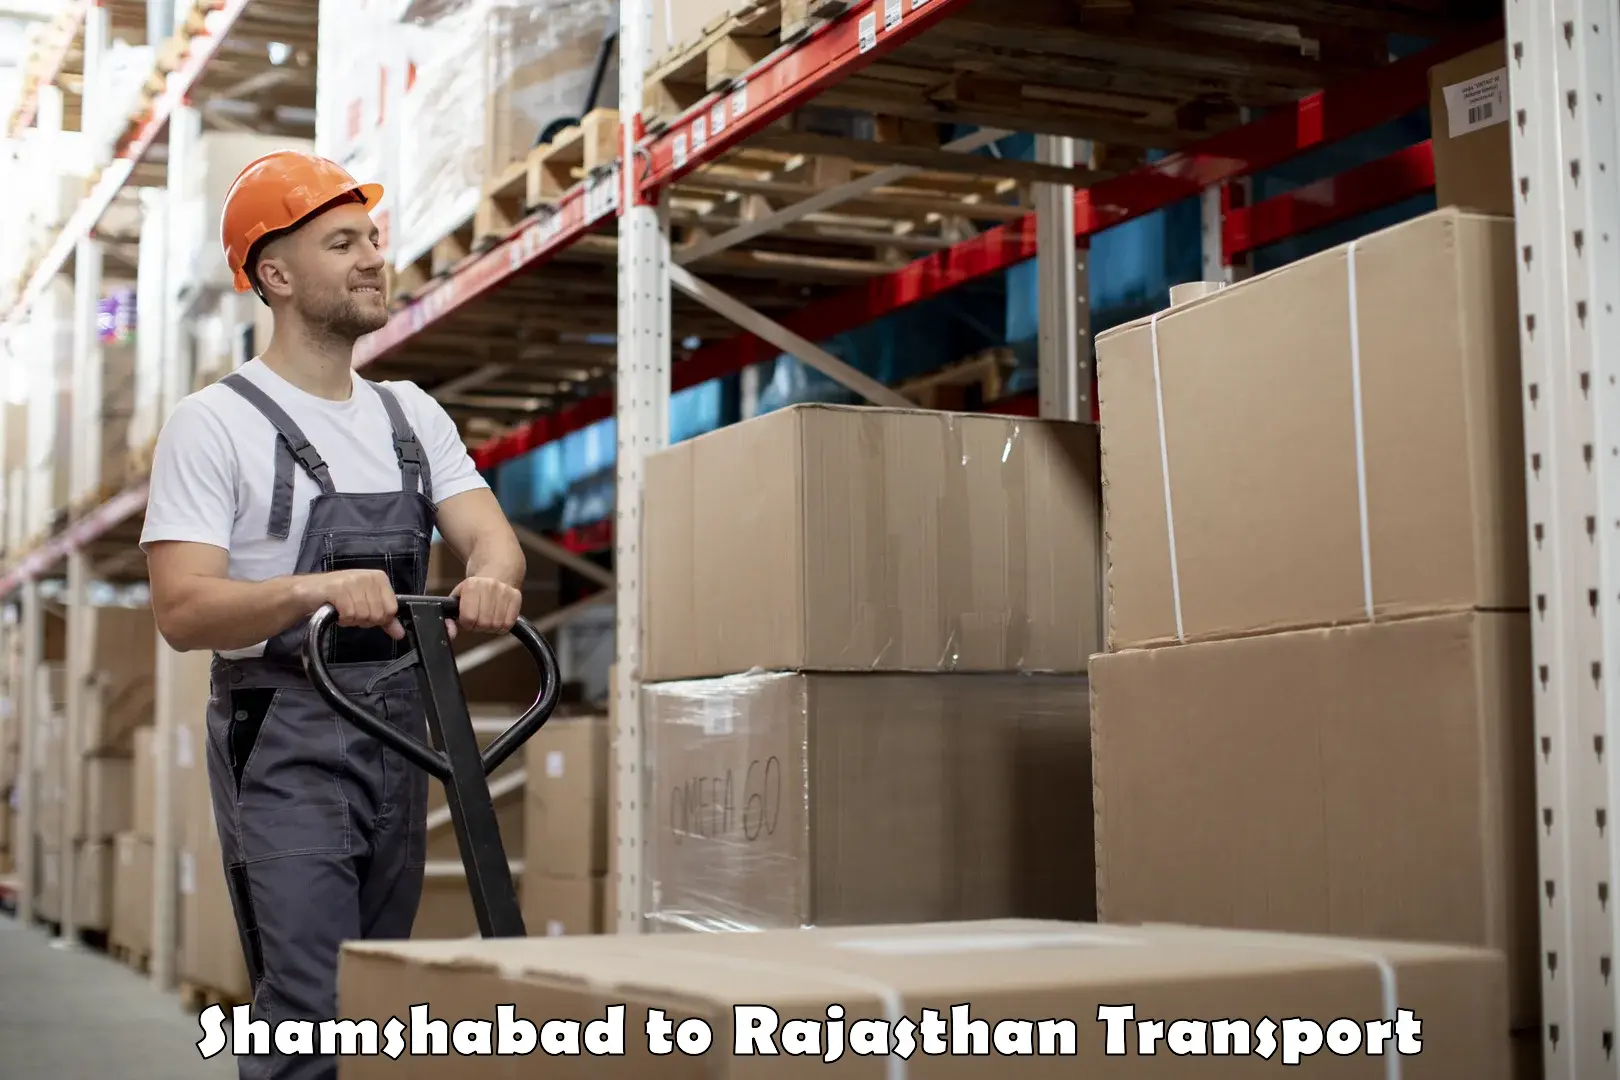 Part load transport service in India Shamshabad to Udaipurwati